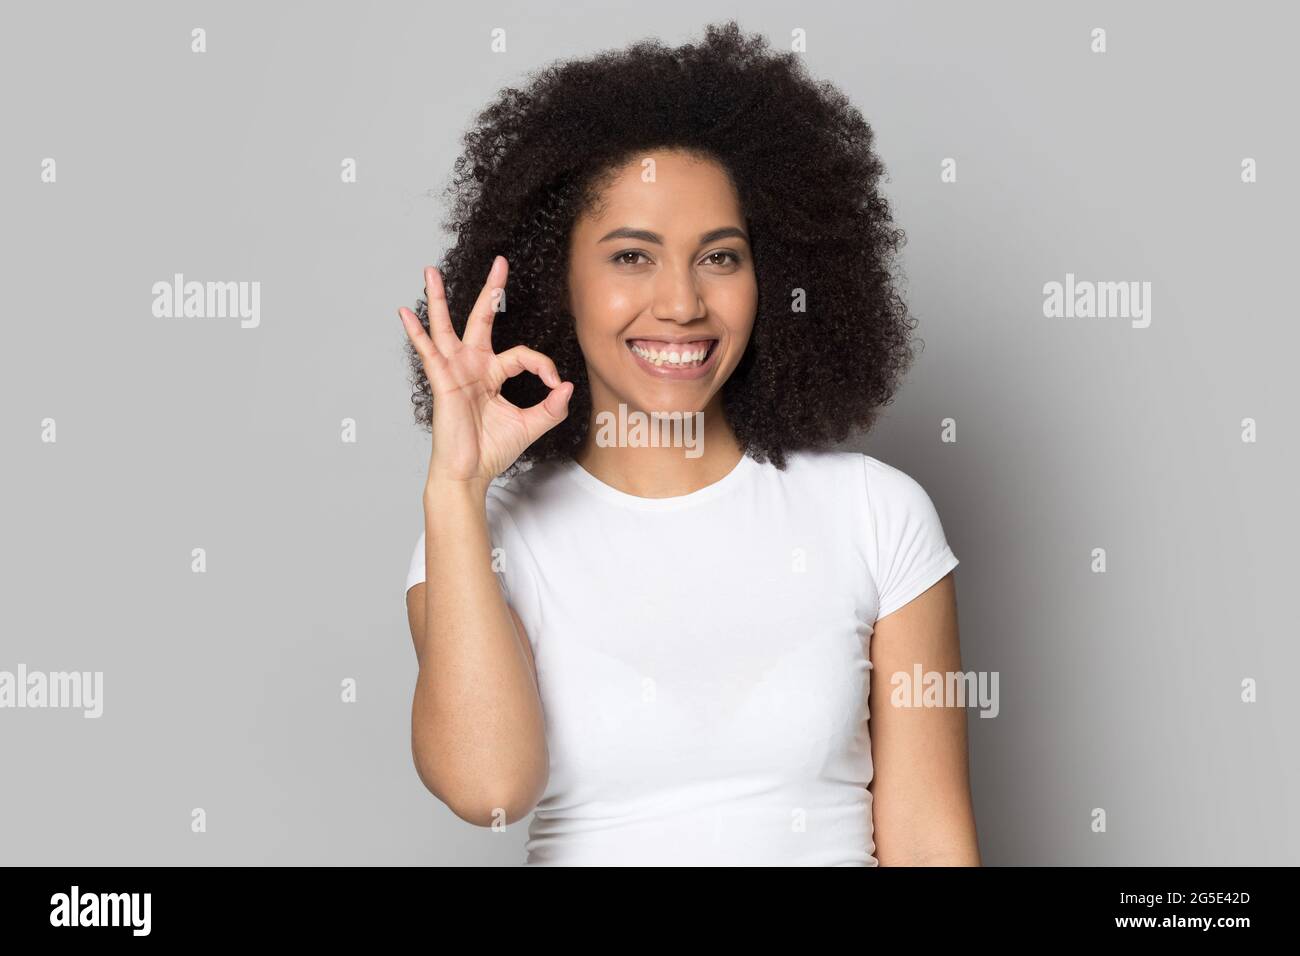 Portrait of smiling mixed race woman show ok hand gesture Stock Photo